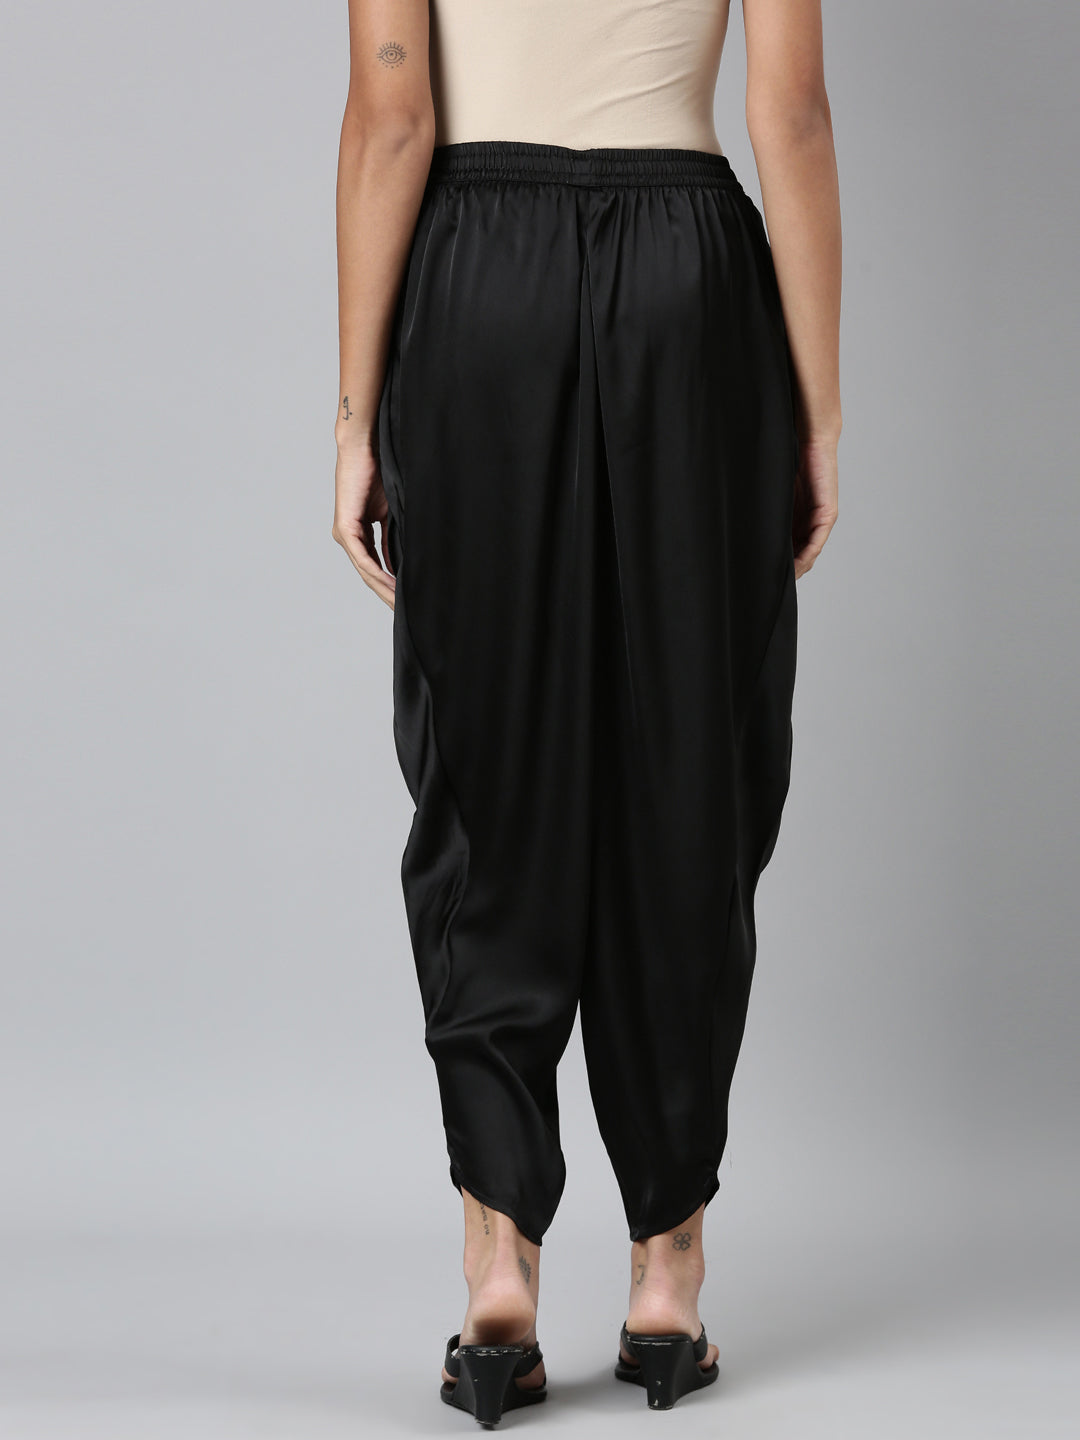 Buy GO COLORS Women Black Mid Rise Shiny Dhoti - S/M at Amazon.in